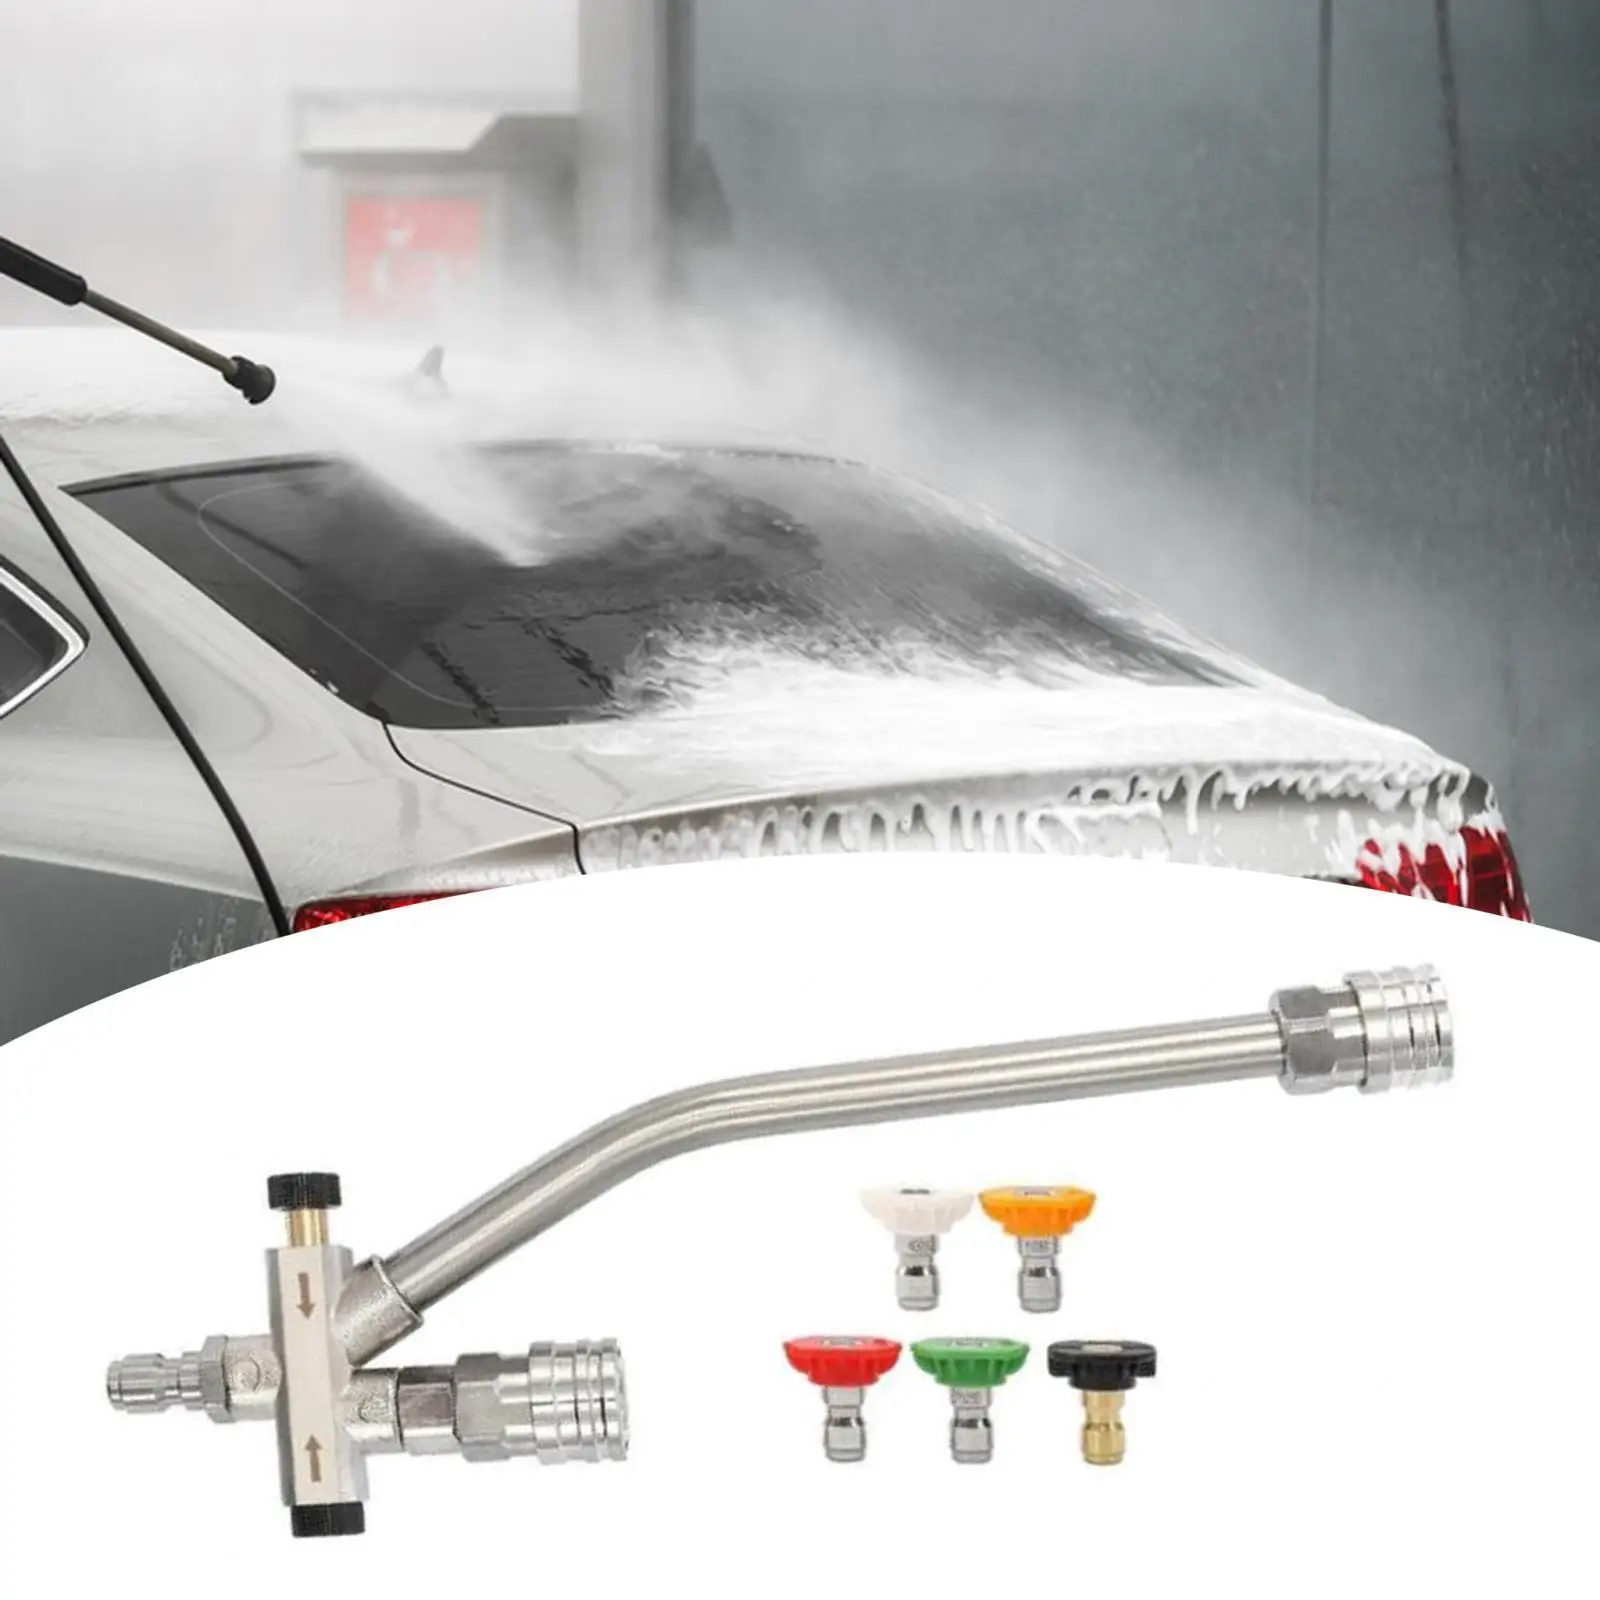 Pressure Washer Double Tip Attachment 1/4inch Quick Connect Dual Valves Foam Spray Nozzles for Cleaning Roofs Washing Cars